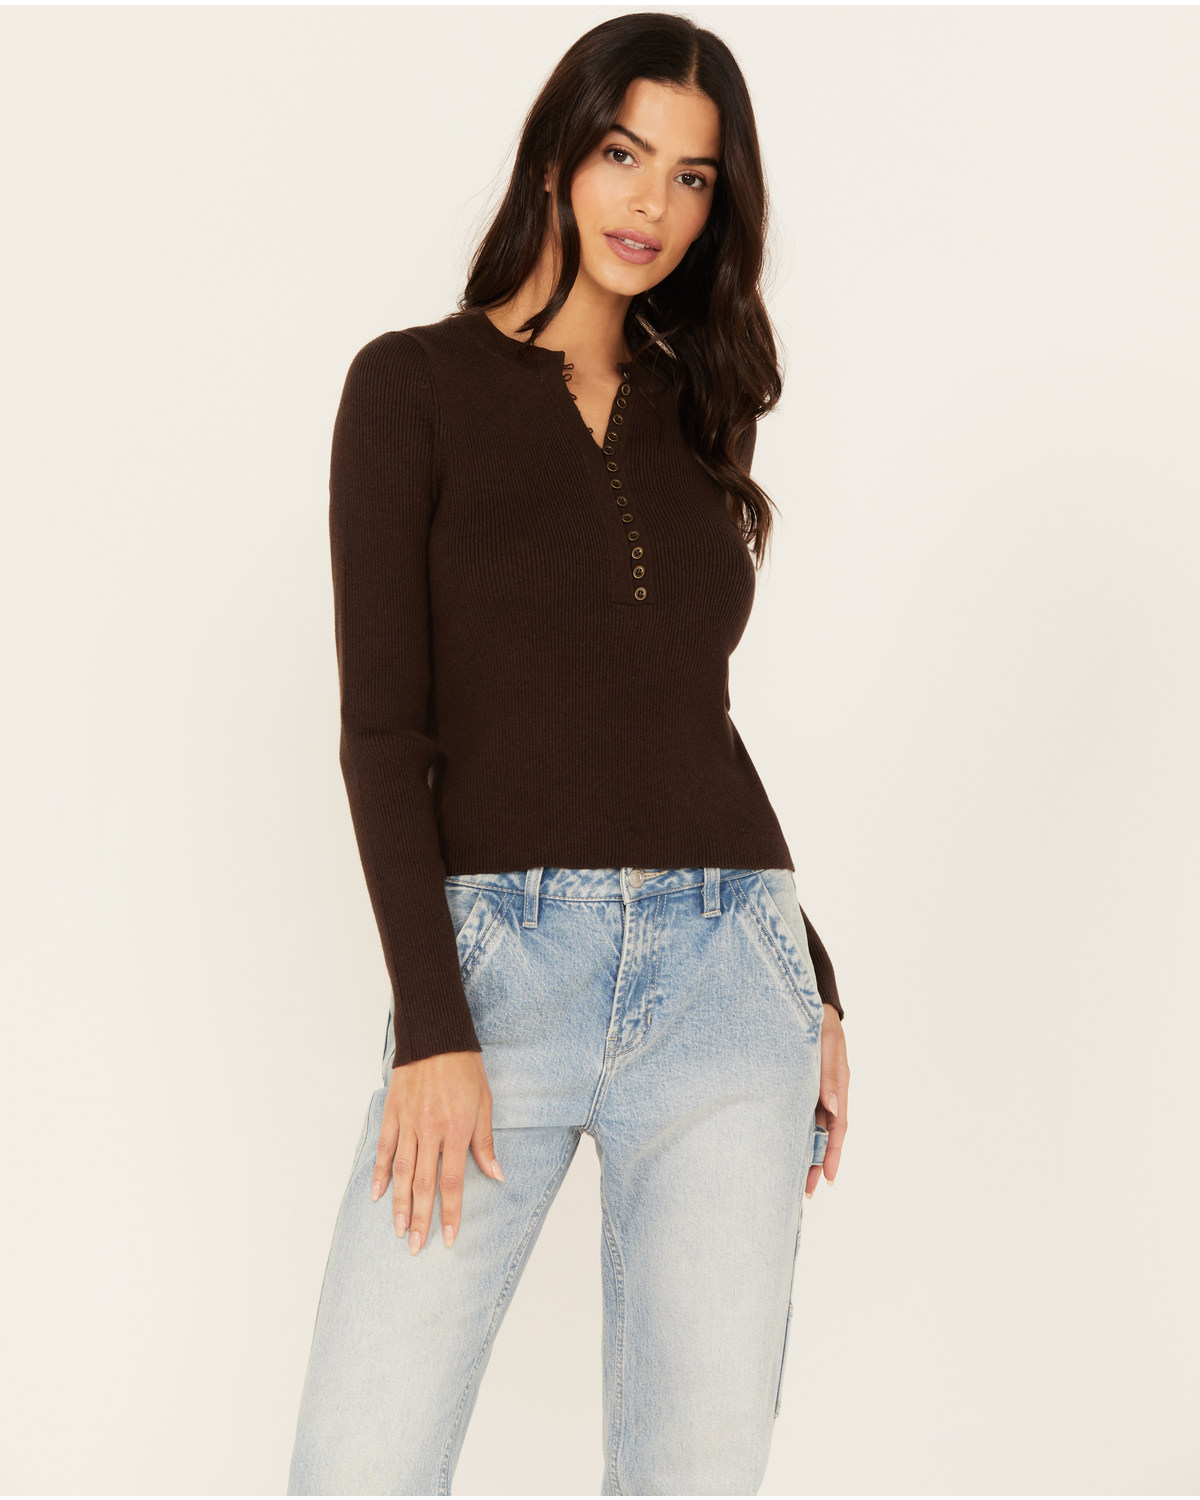 Cleo + Wolf Women's Ribbed Henley Sweater